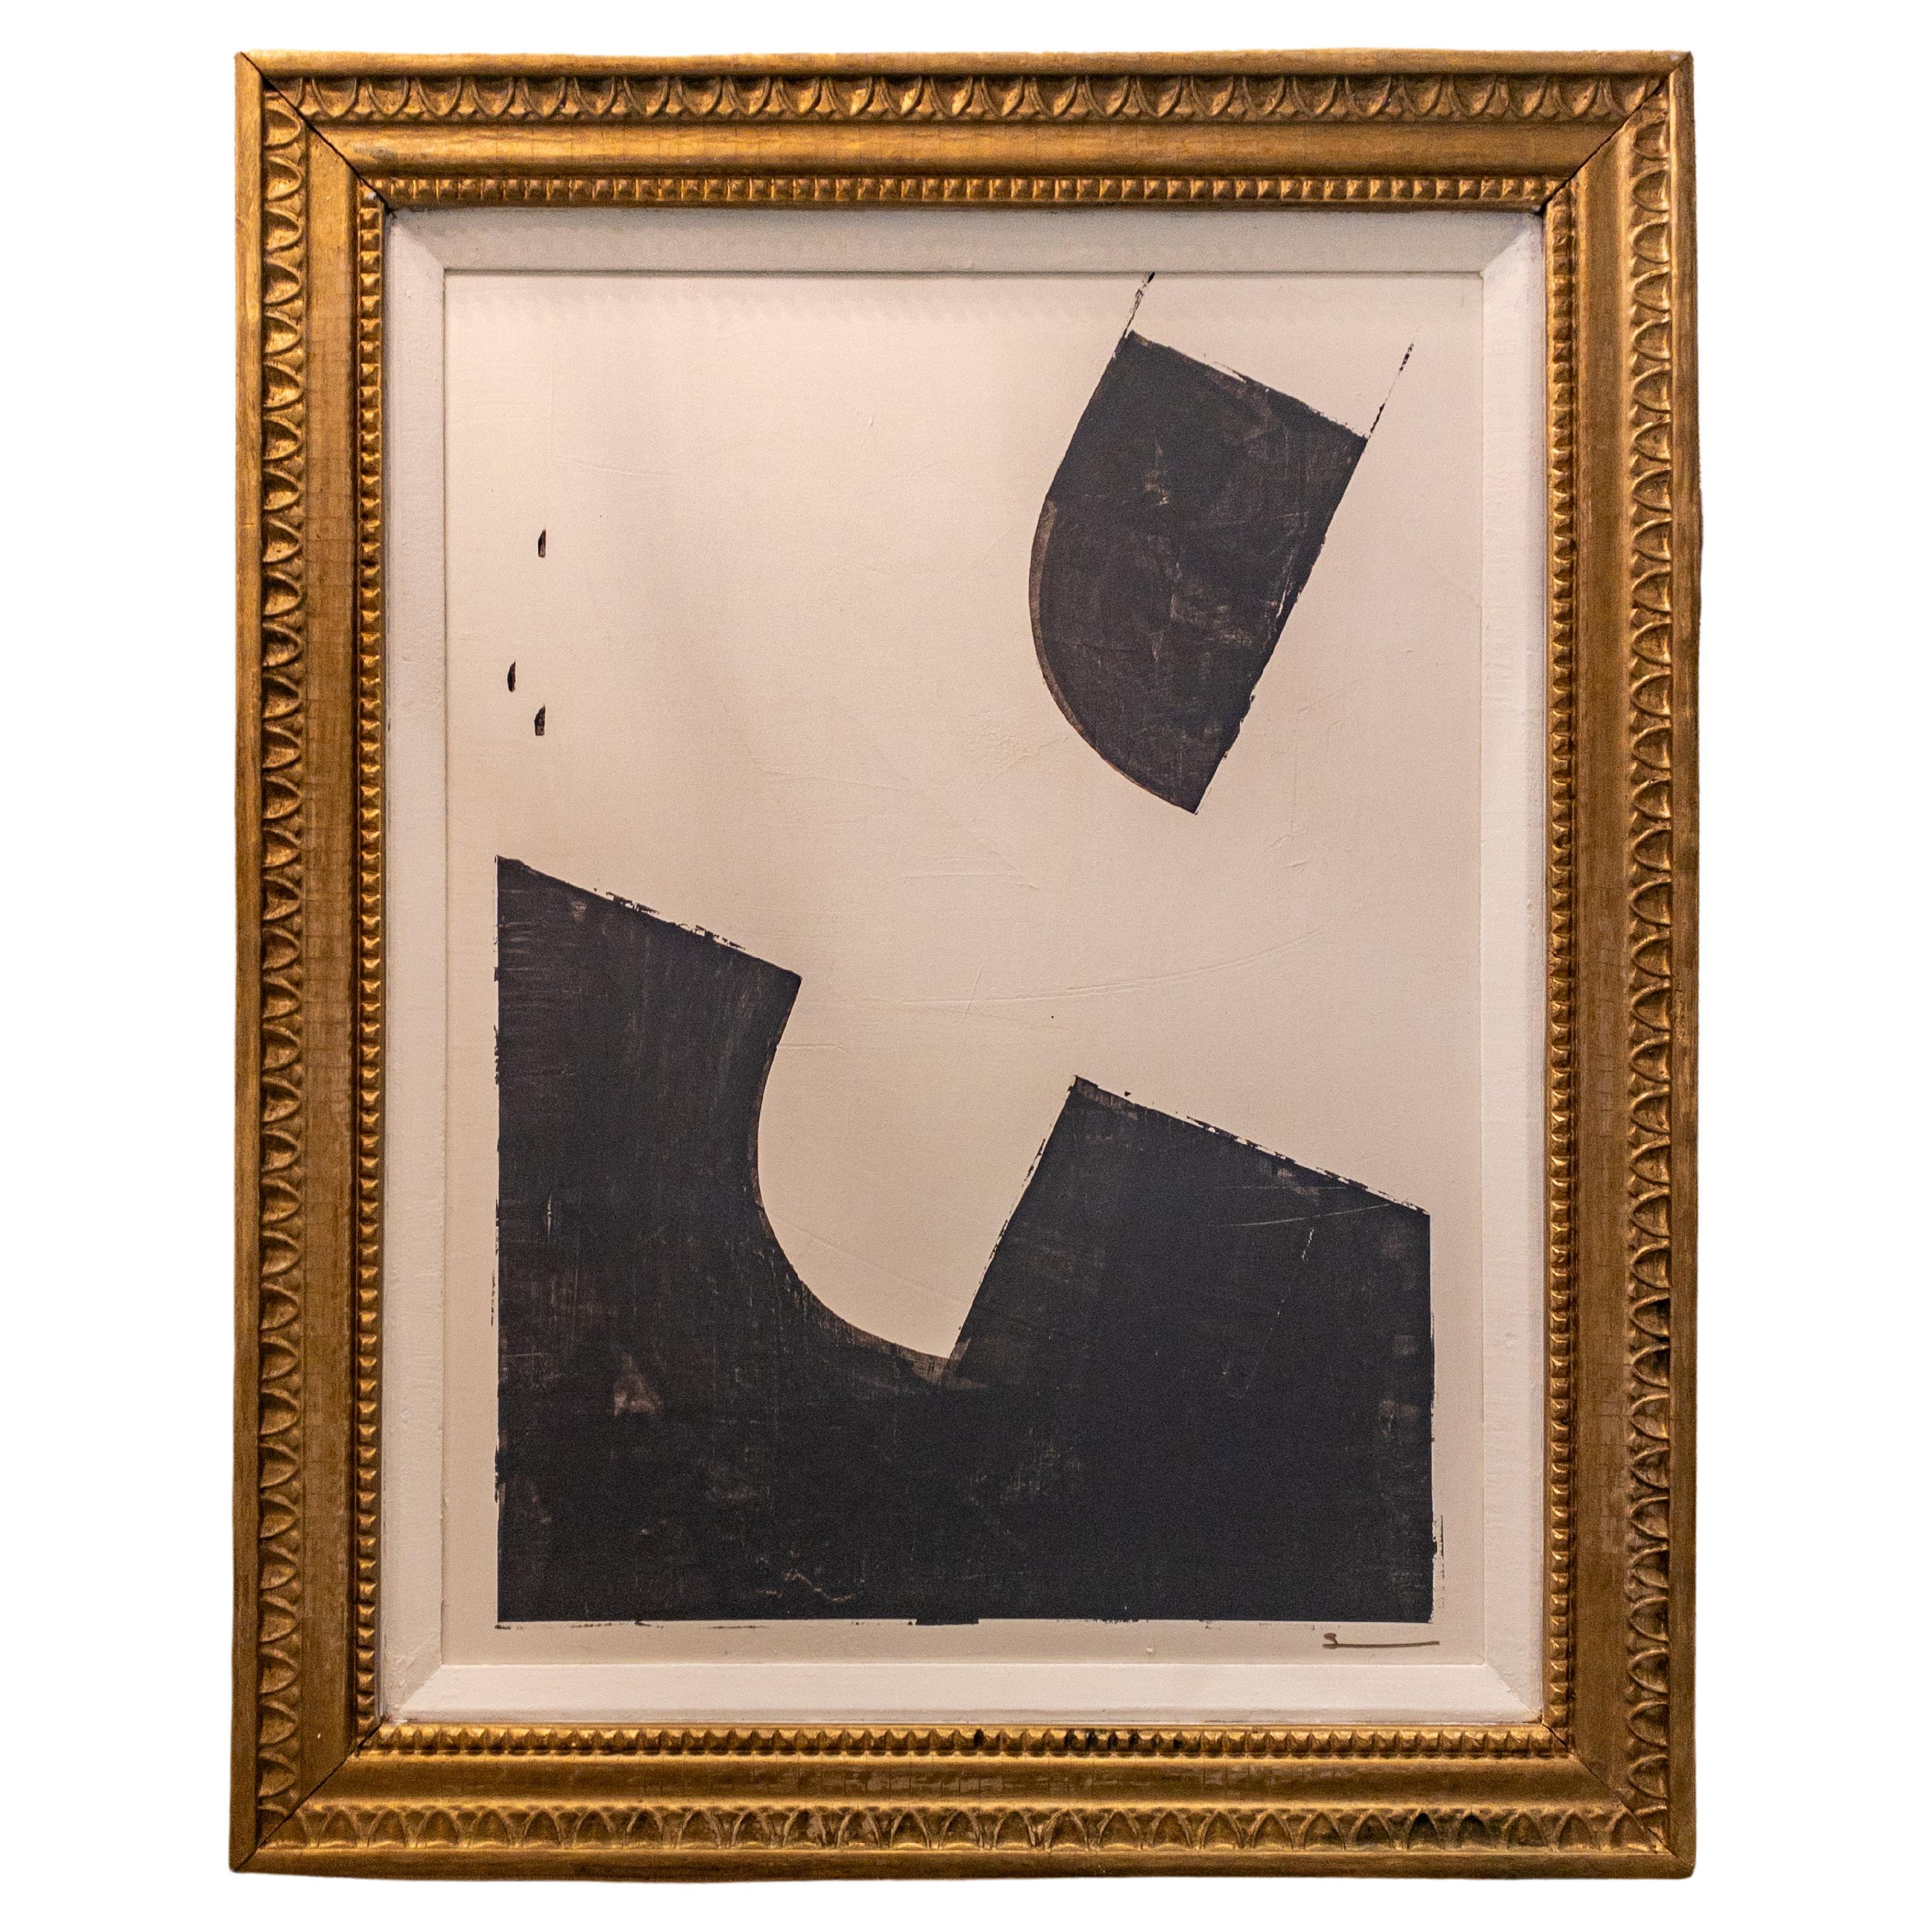 Original Modern Contemporary Black and White Painting in Antique Gilt Frame